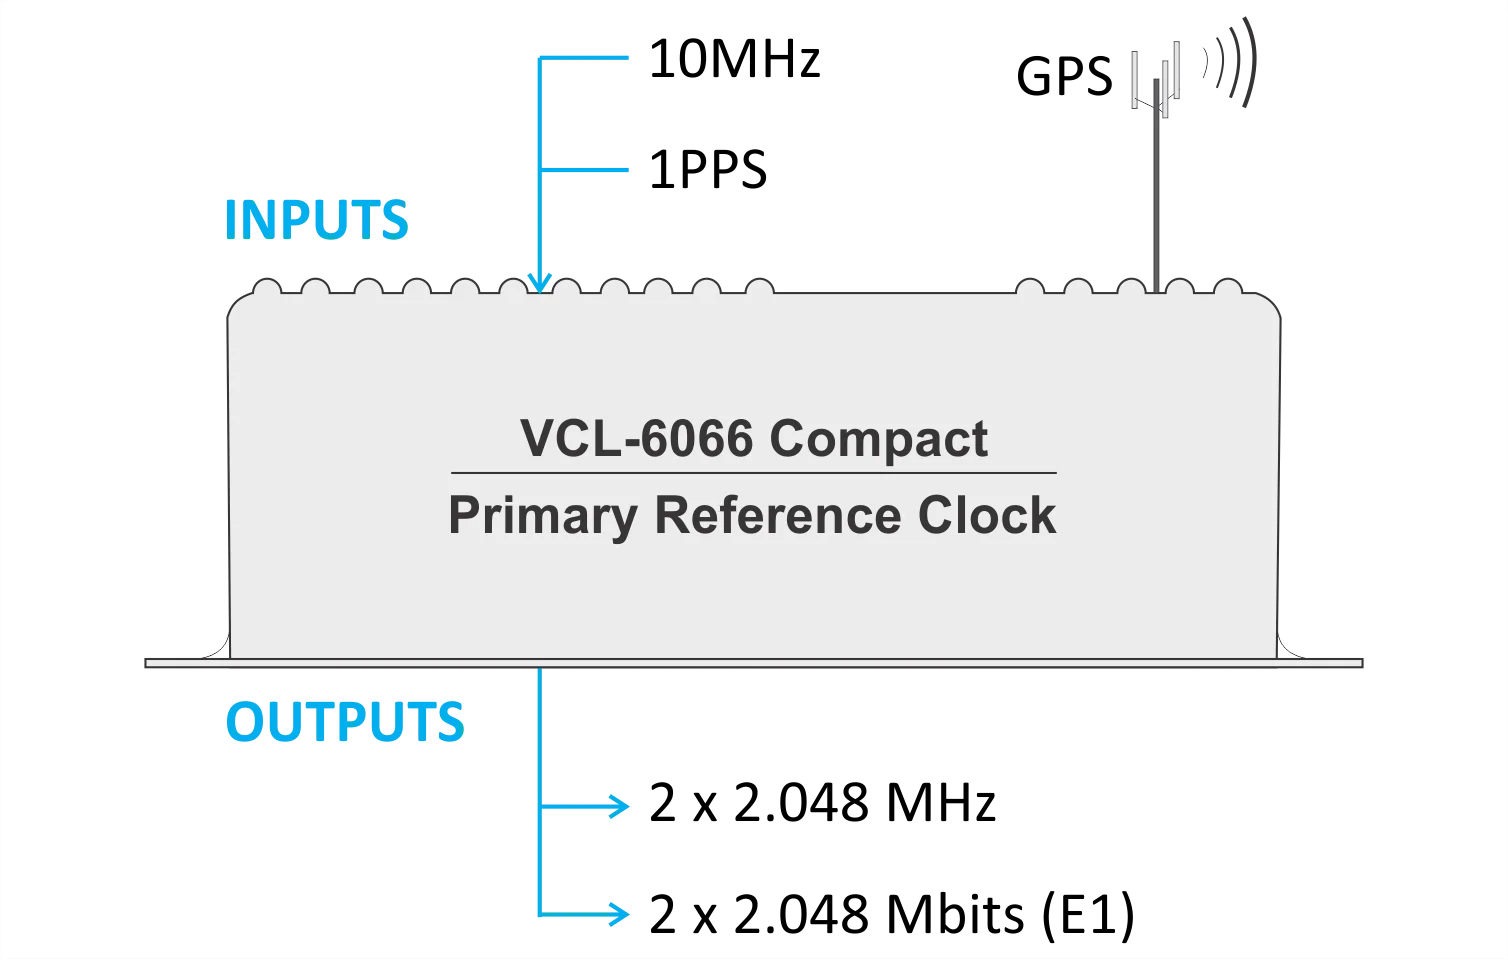 VCL-6066, Compact Primary Reference Clock